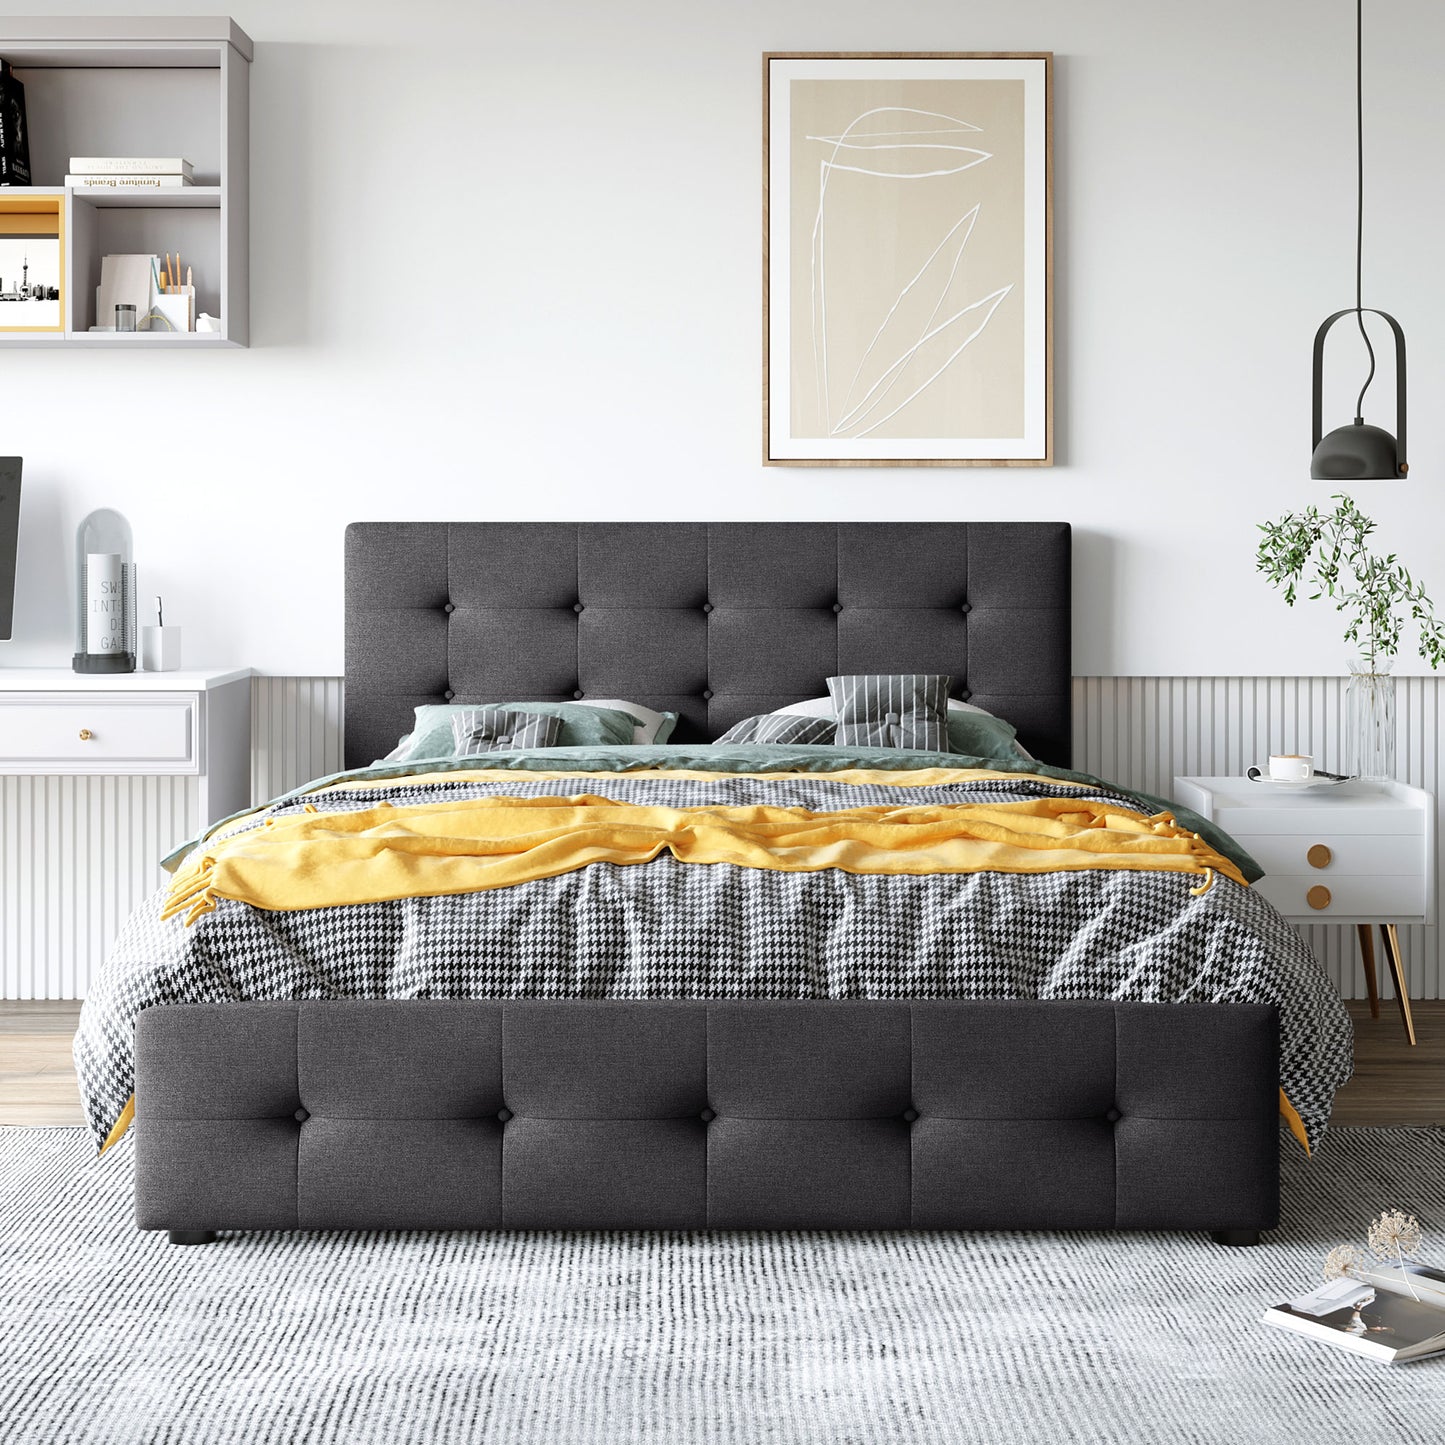 Queen-size Dark Gray Upholstered Platform Bed with Four Storage Drawers